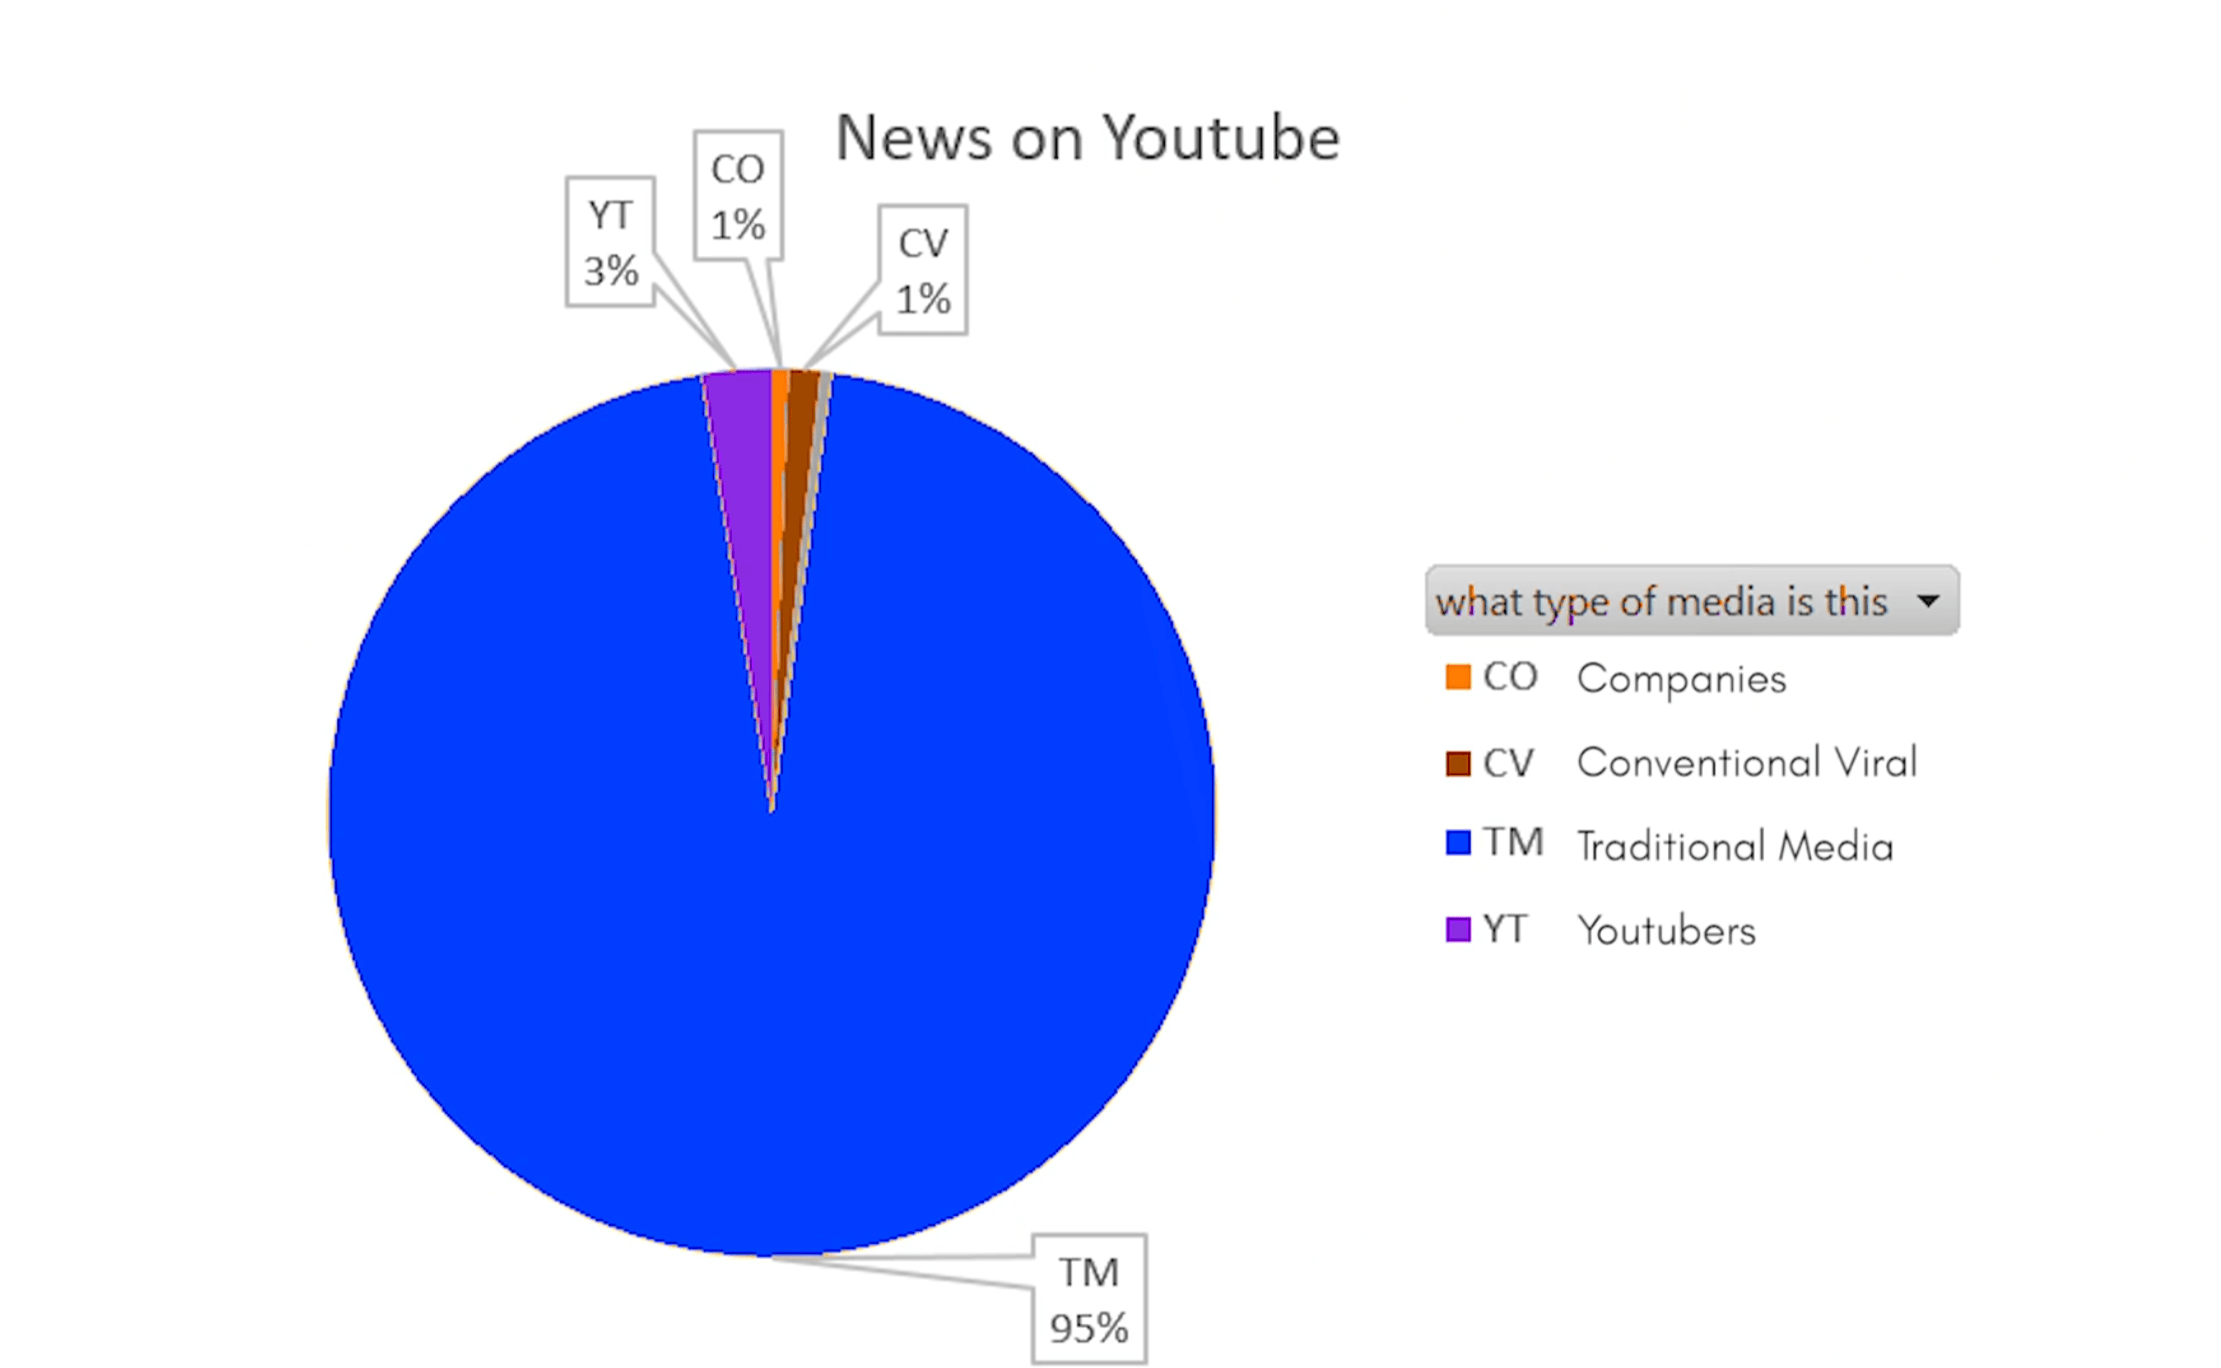 A pie chart showing that 95% of the Trending news videos from the study were created by traditional media outlets.